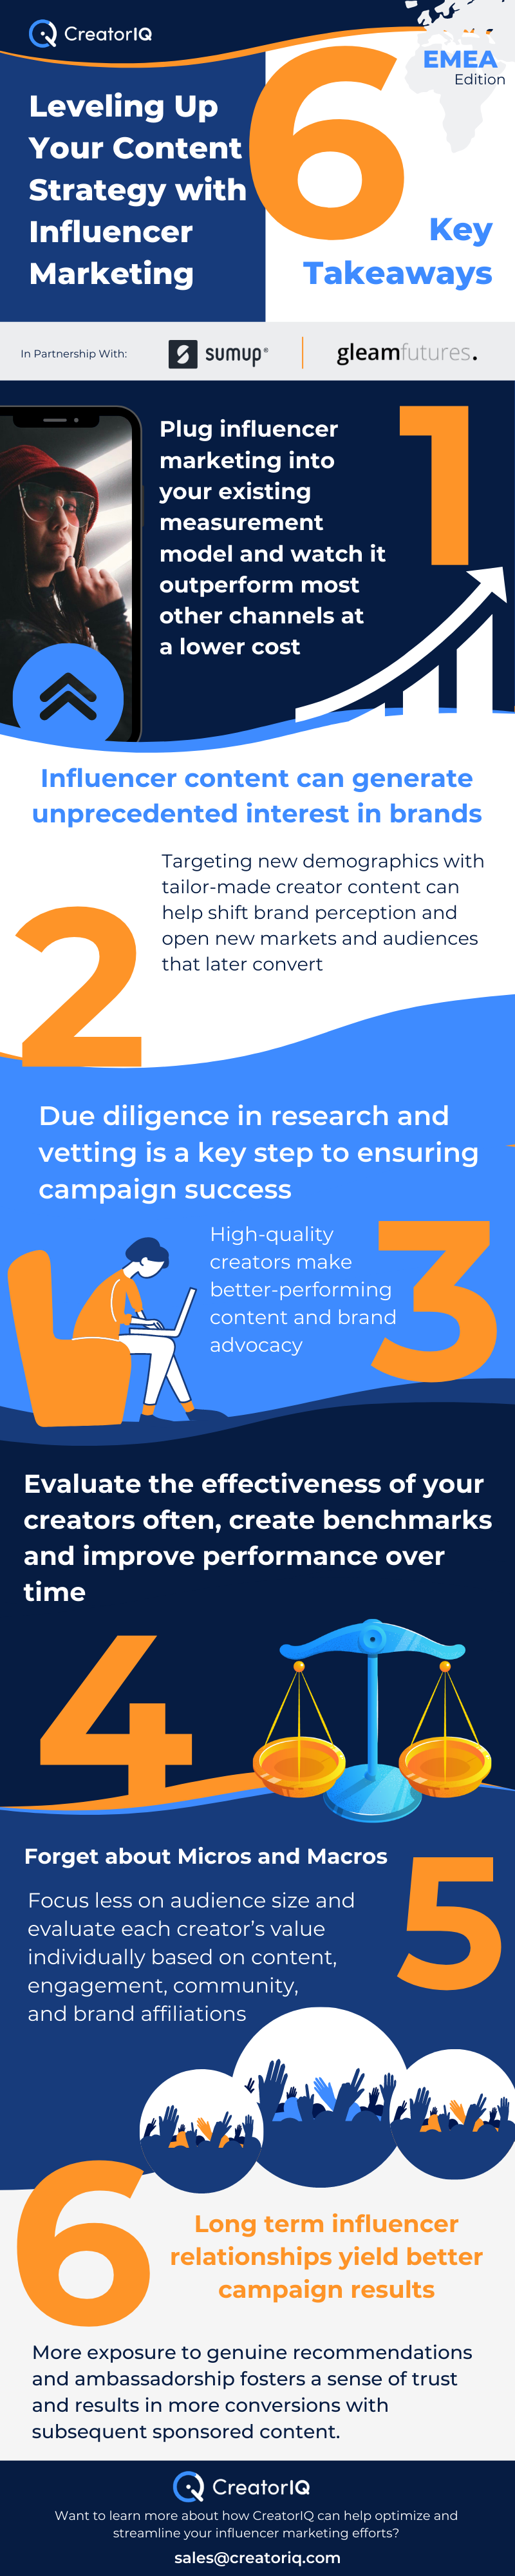 [Infographic + Video] Virtual Views: Leveling Up Your Content Strategy with Influencer Marketing